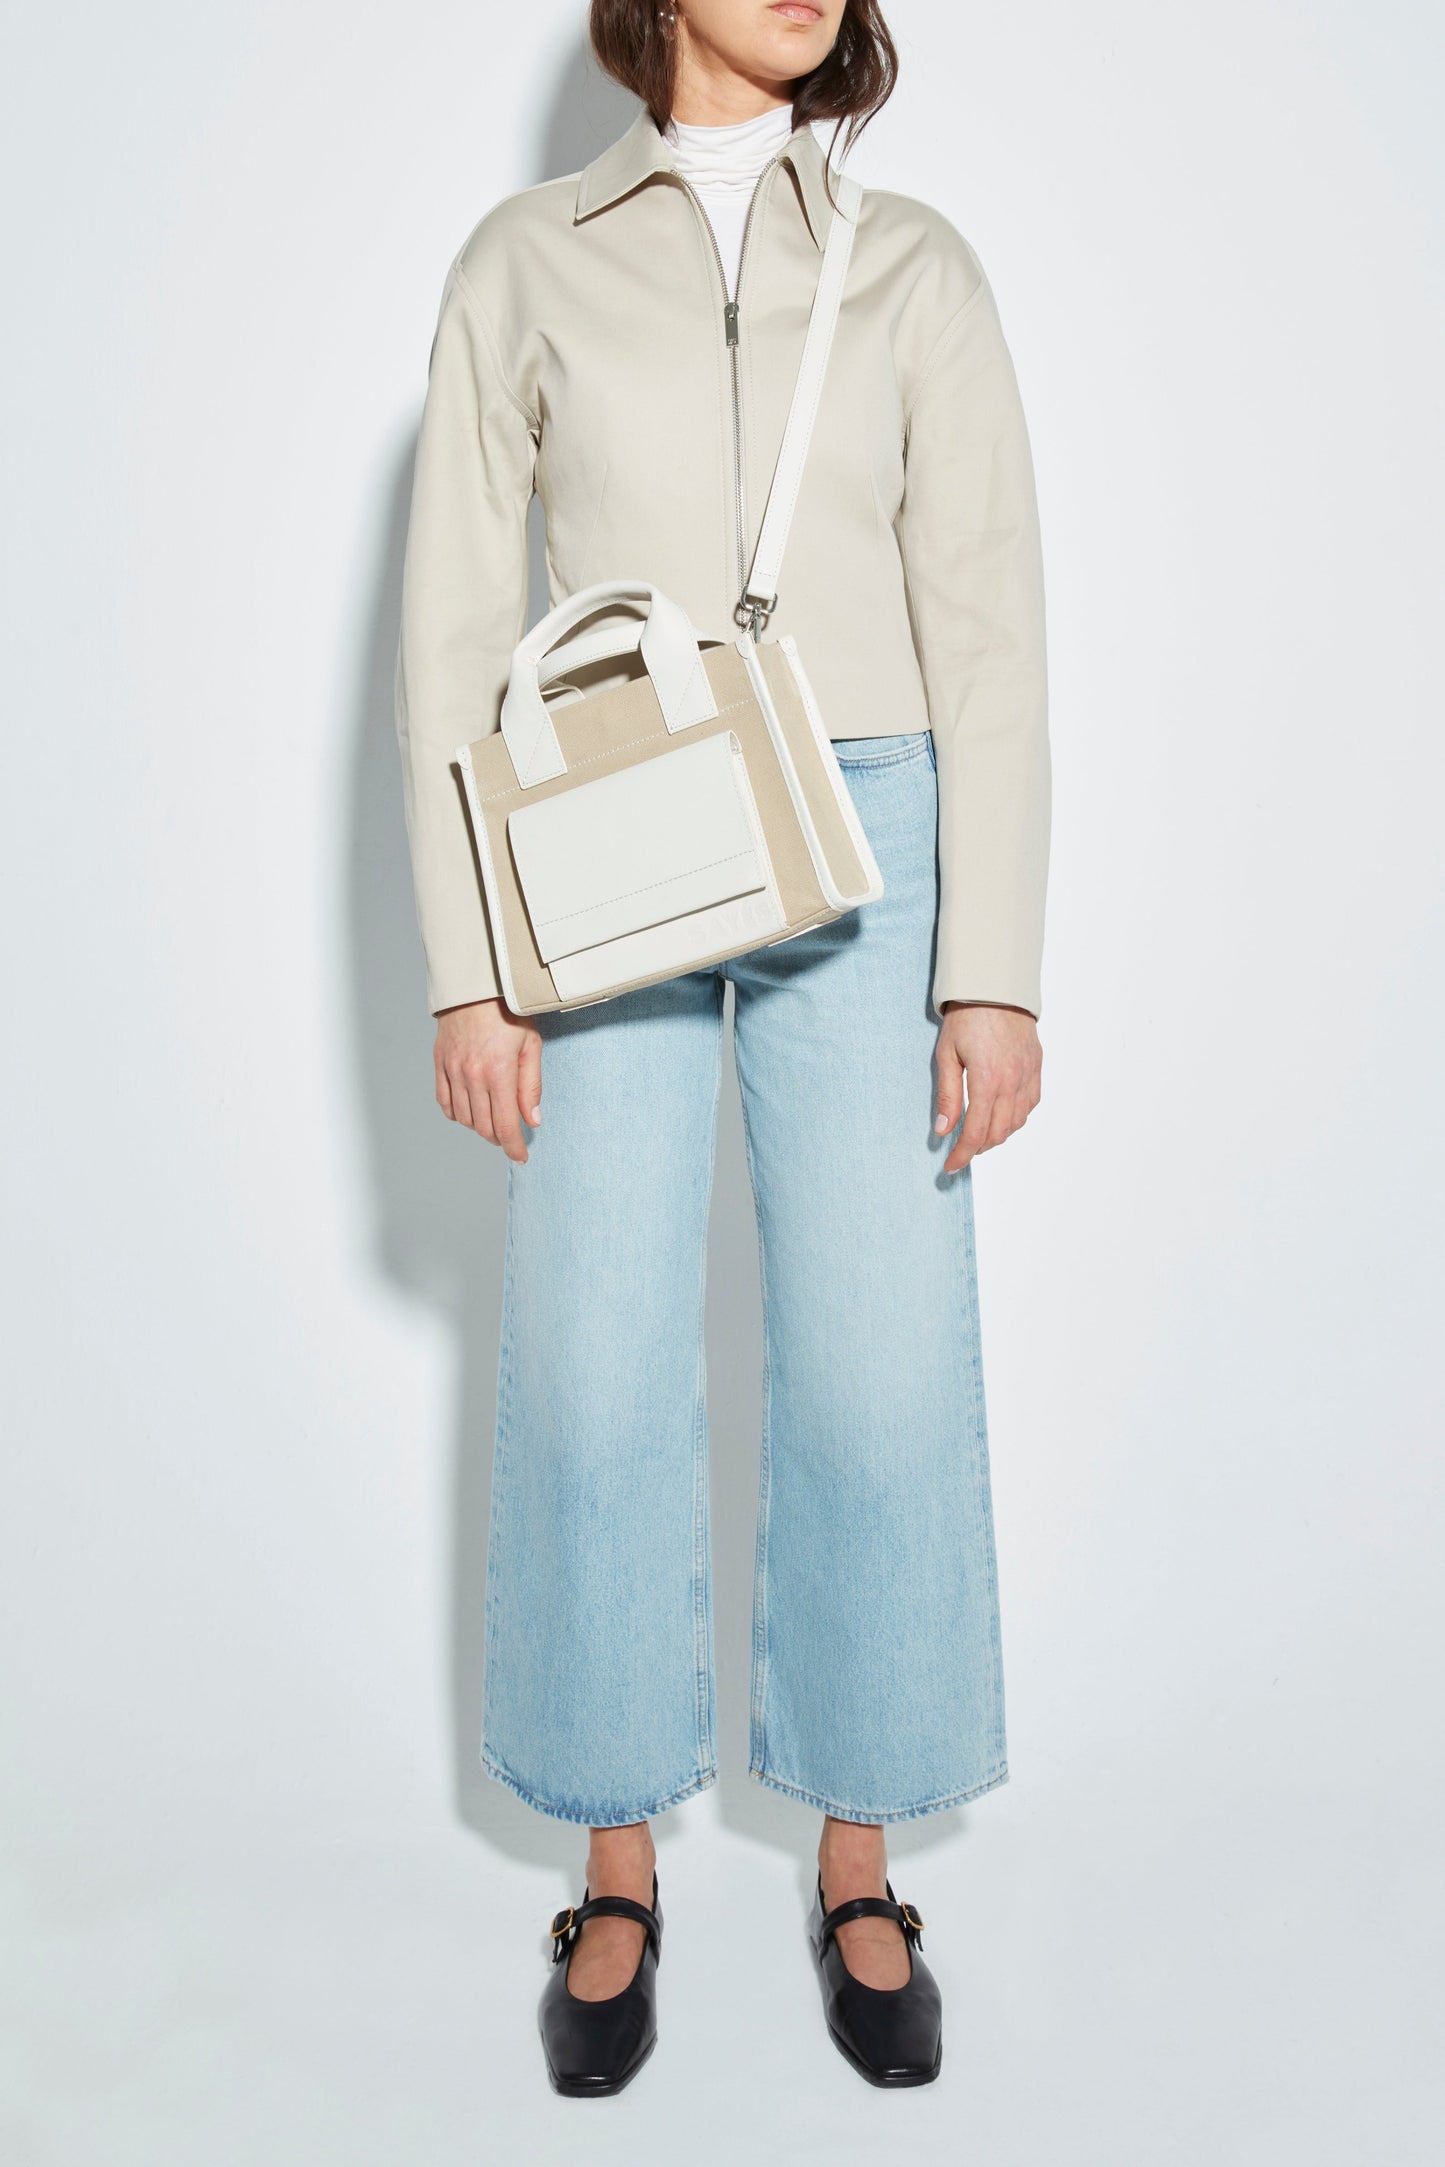 STITCHED POCKET MINI TOTE IN BEIGE AND OFF-WHITE